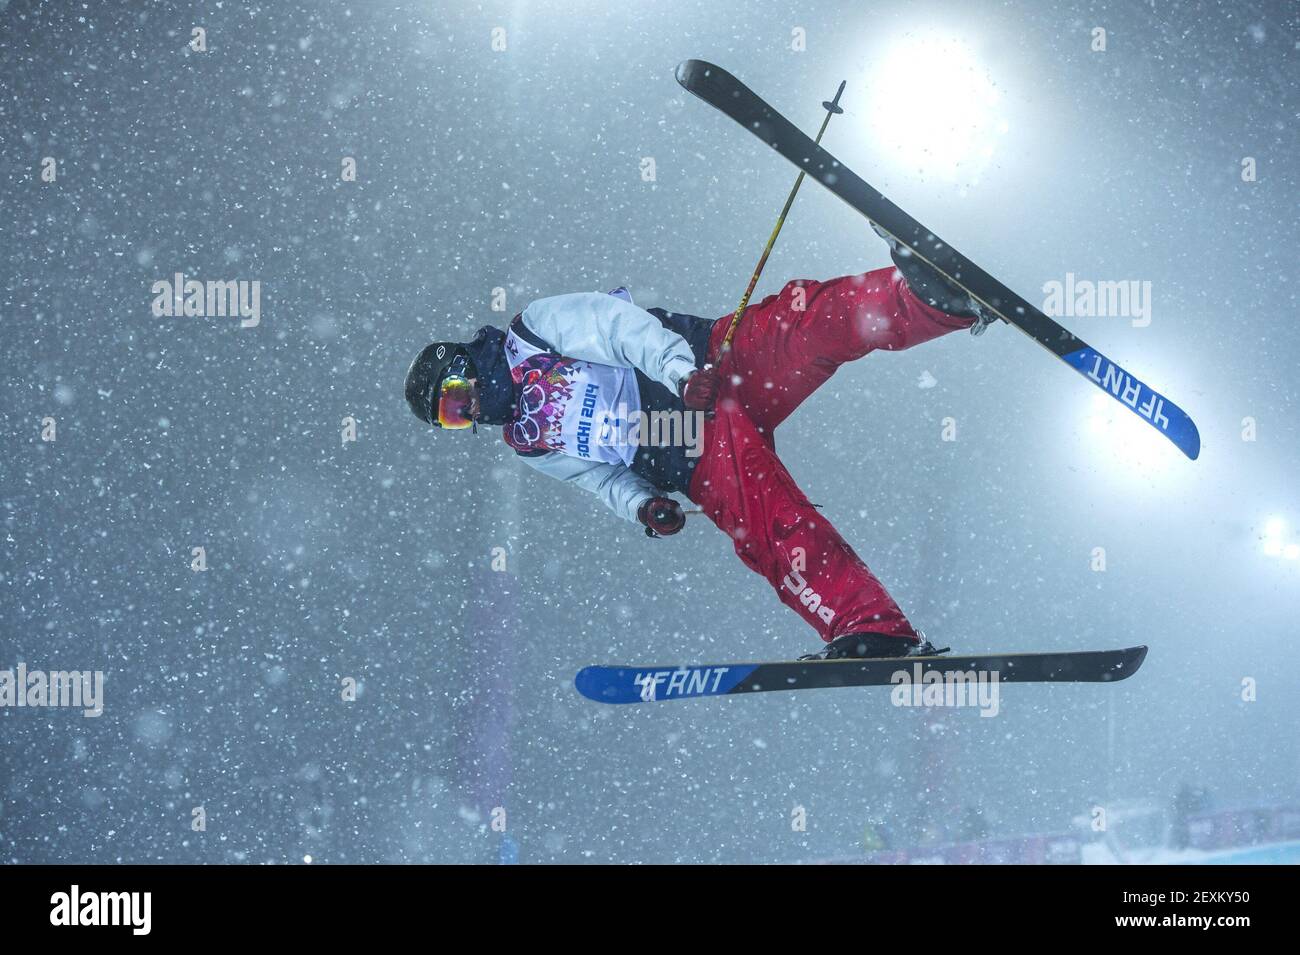 USA's David Wise competes in the men's ski halfpipe at Rosa Khutor Extreme Park during the Winter Olympics in Sochi, Russia, on Tuesday, Feb. 18, 2014. (Photo by Mark Reis/Colorado Springs Gazette/MCT/Sipa USA) Stock Photo